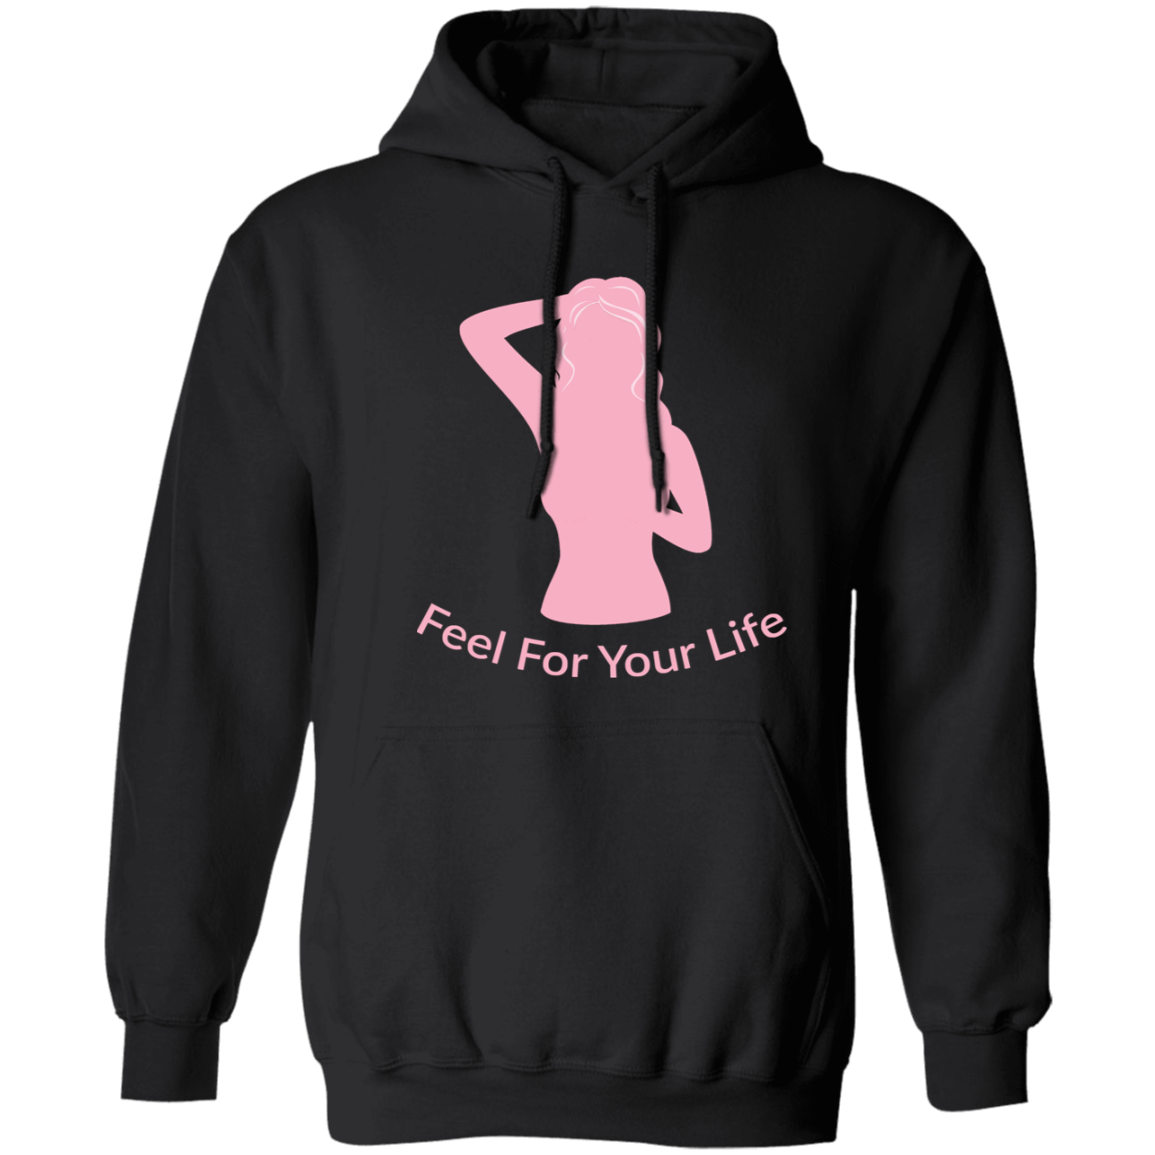 Feel For Your Life Unisex Hoodie Black w/ Light Pink Logo Large